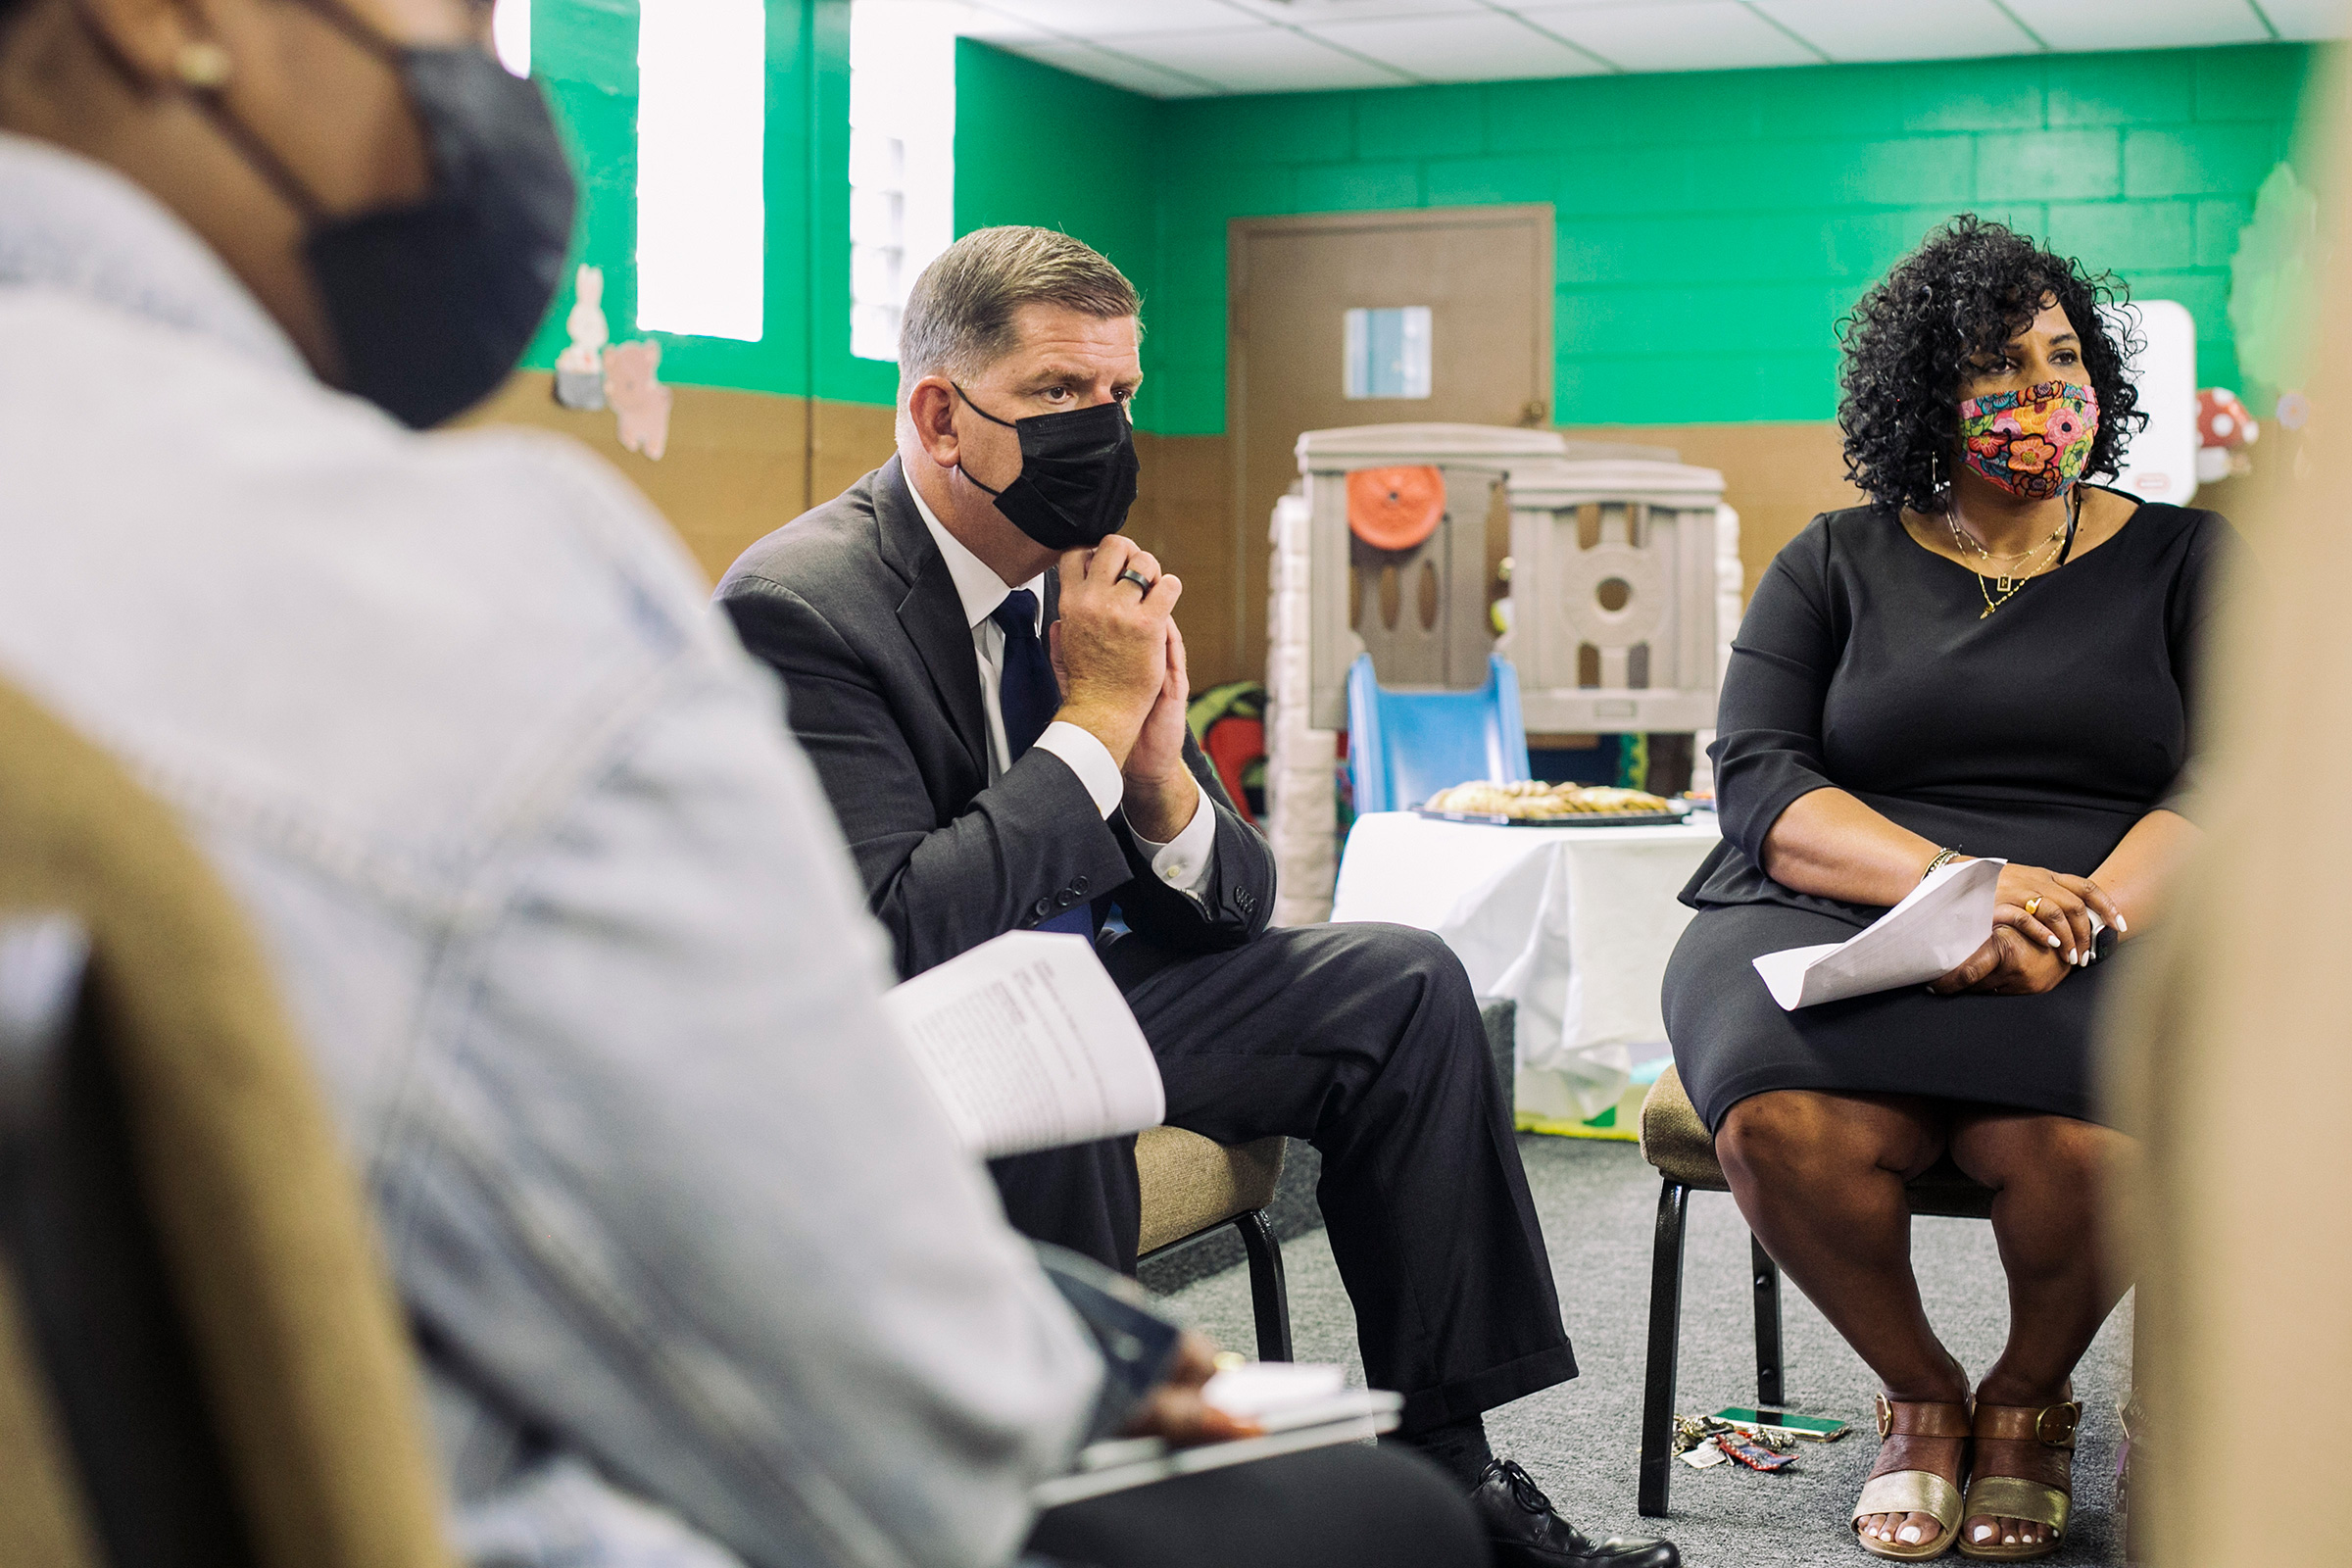 At a roundtable in a Dayton childcare center, Walsh explains the Biden Administration’s plans to support working parents. (Andrew Spear for TIME)